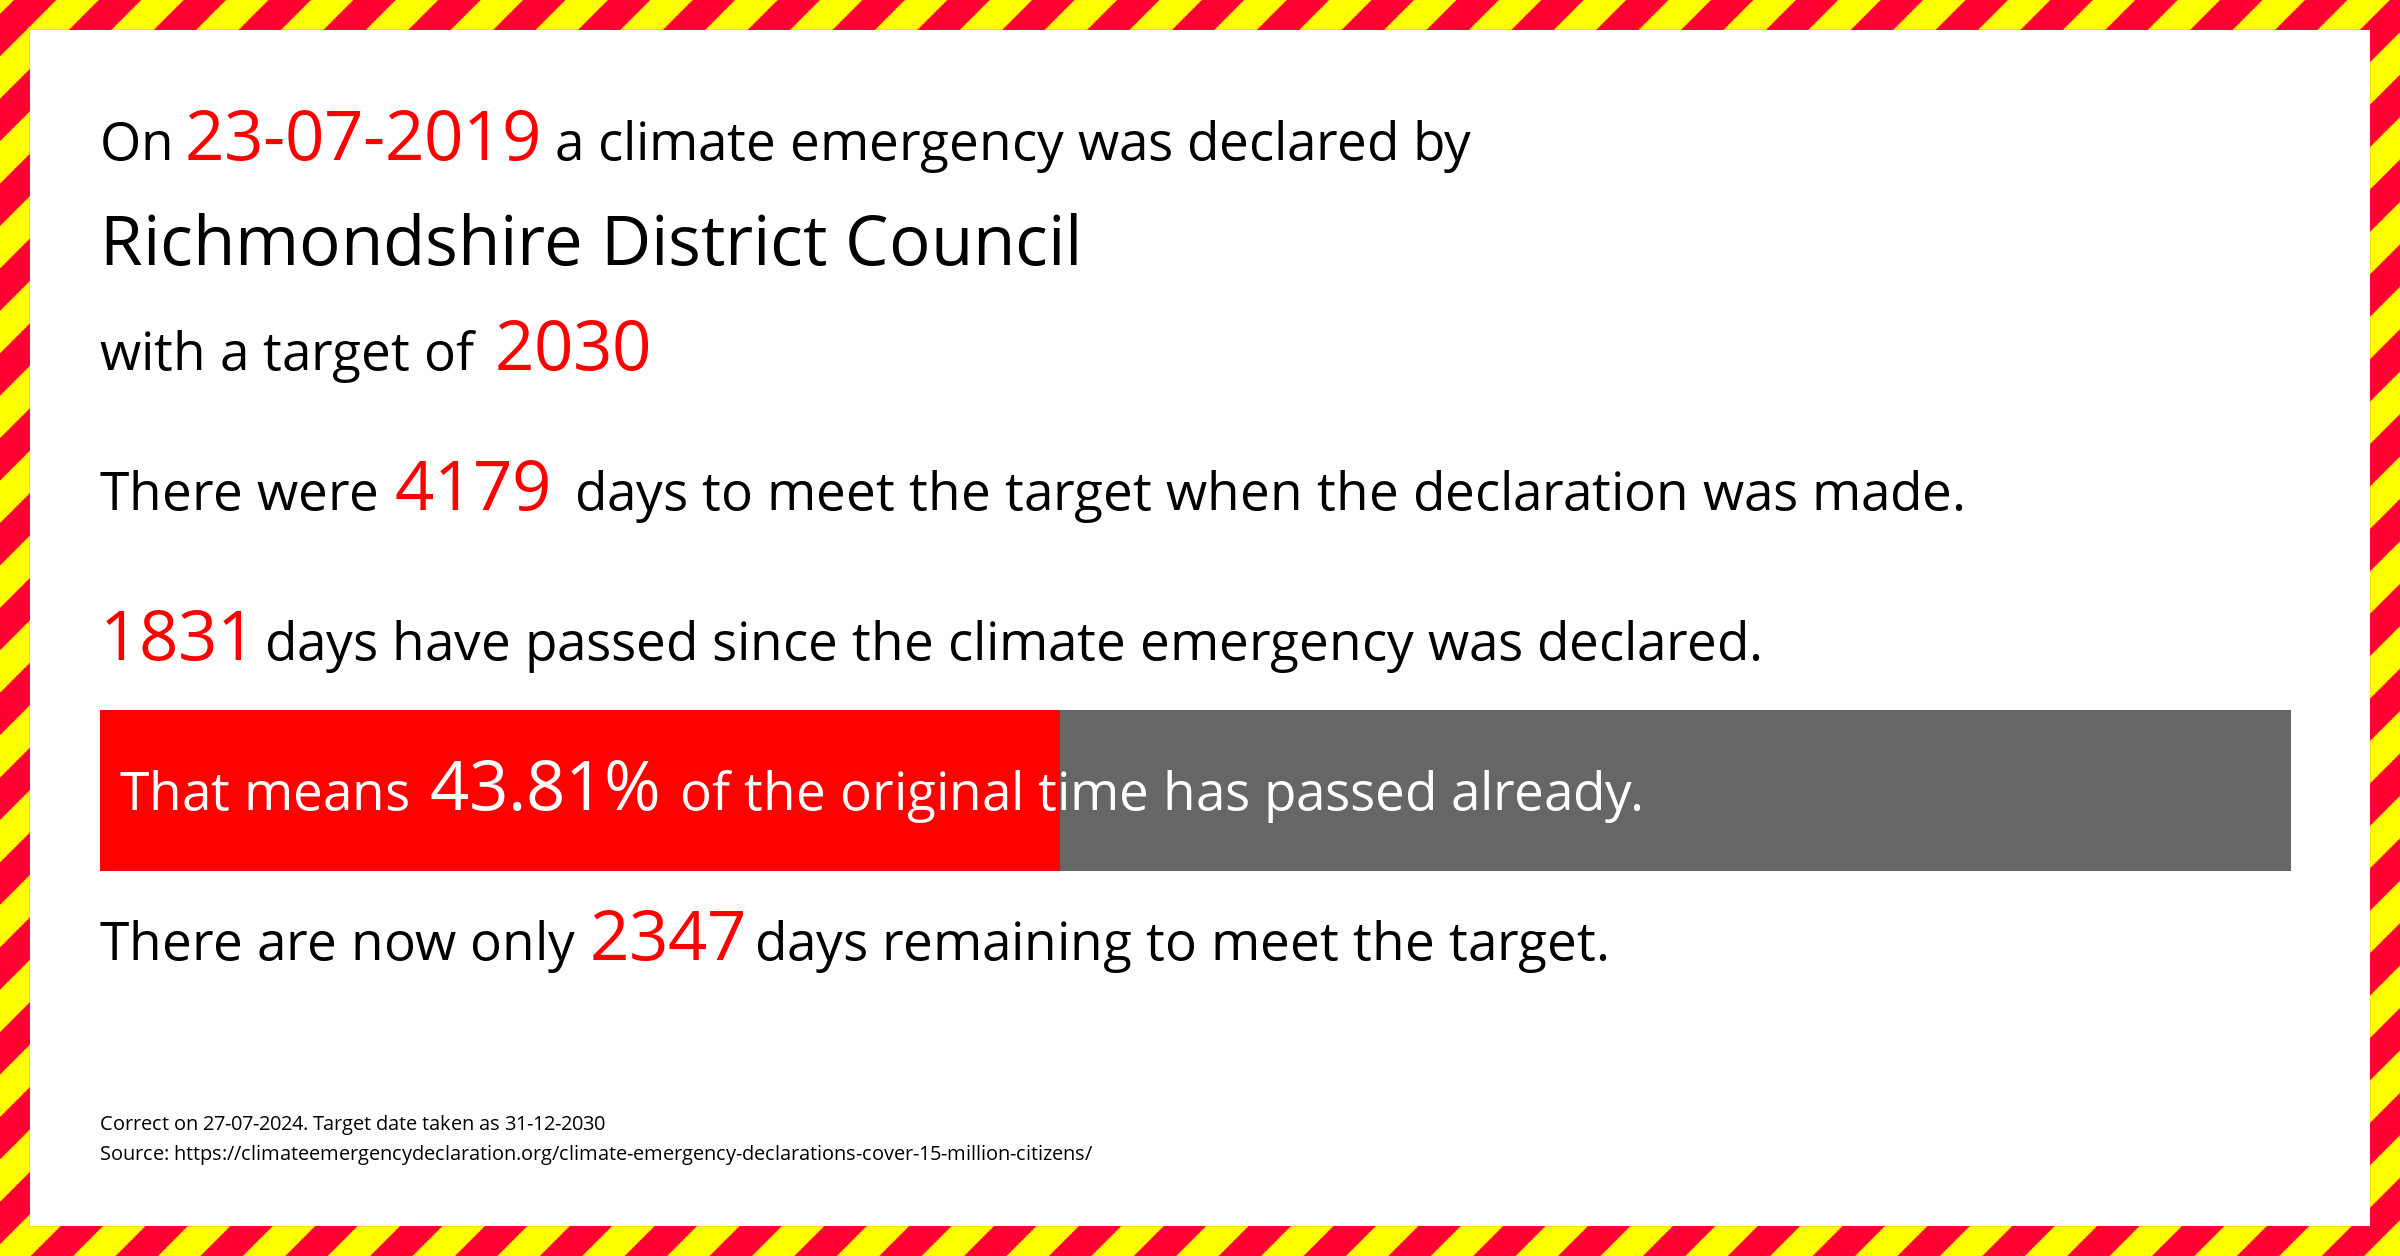 Richmondshire District Council declared a Climate emergency on Tuesday 23rd July 2019, with a target of 2030.